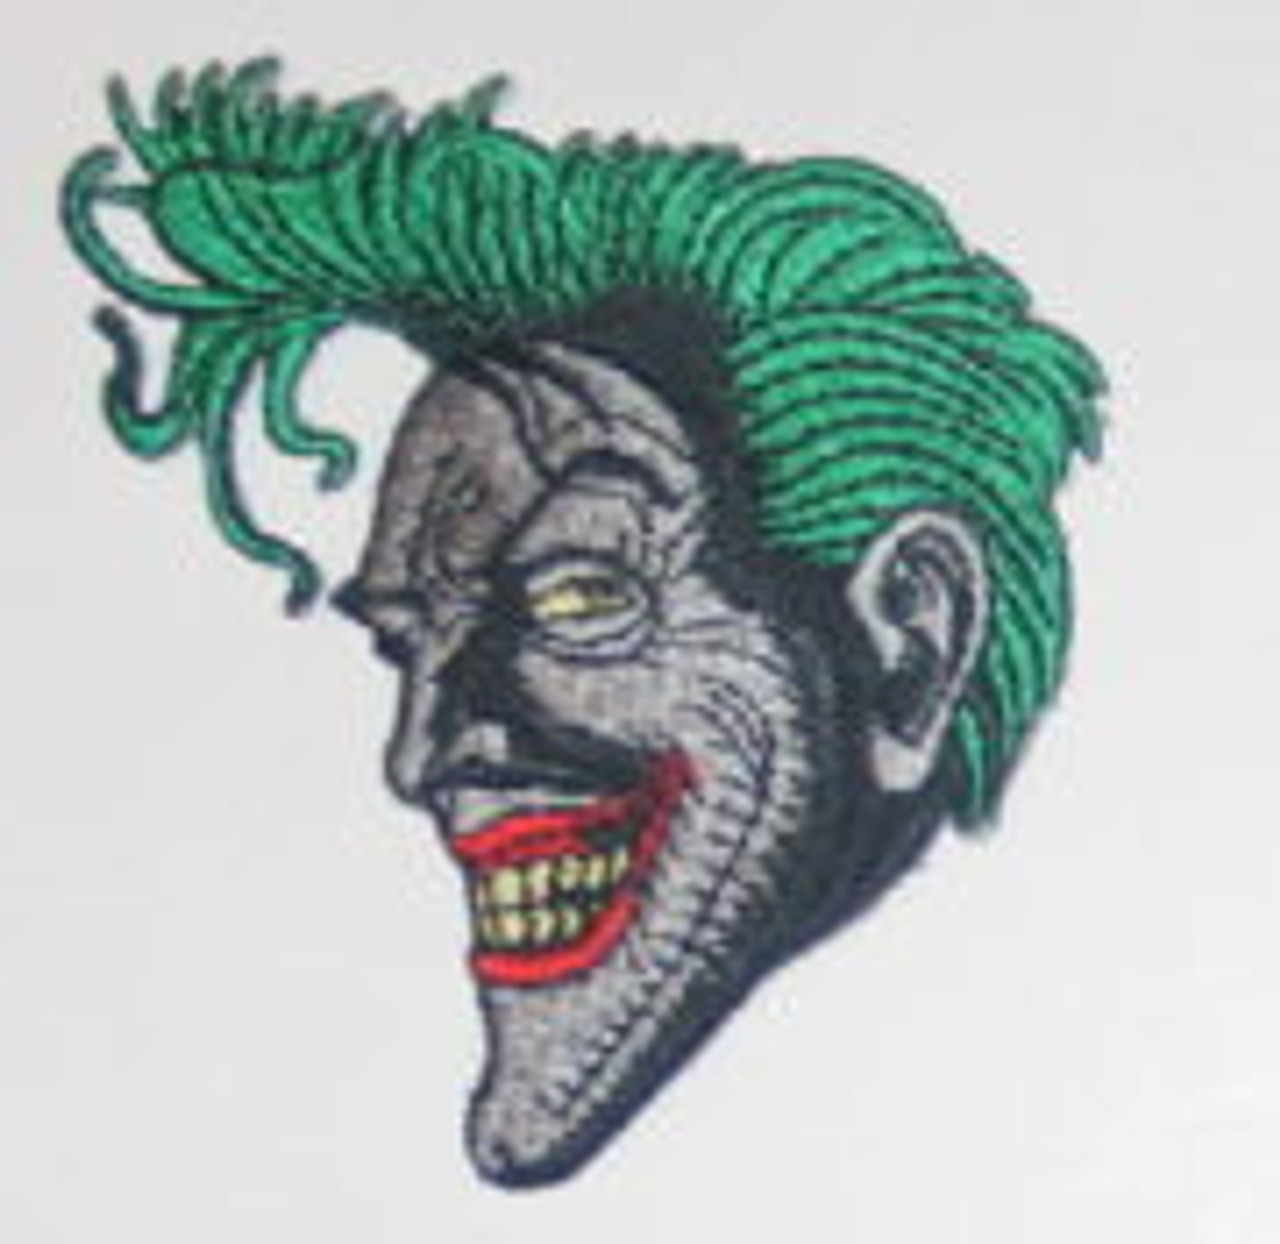 Batman animated tv show Joker smiling face embroidered patch 